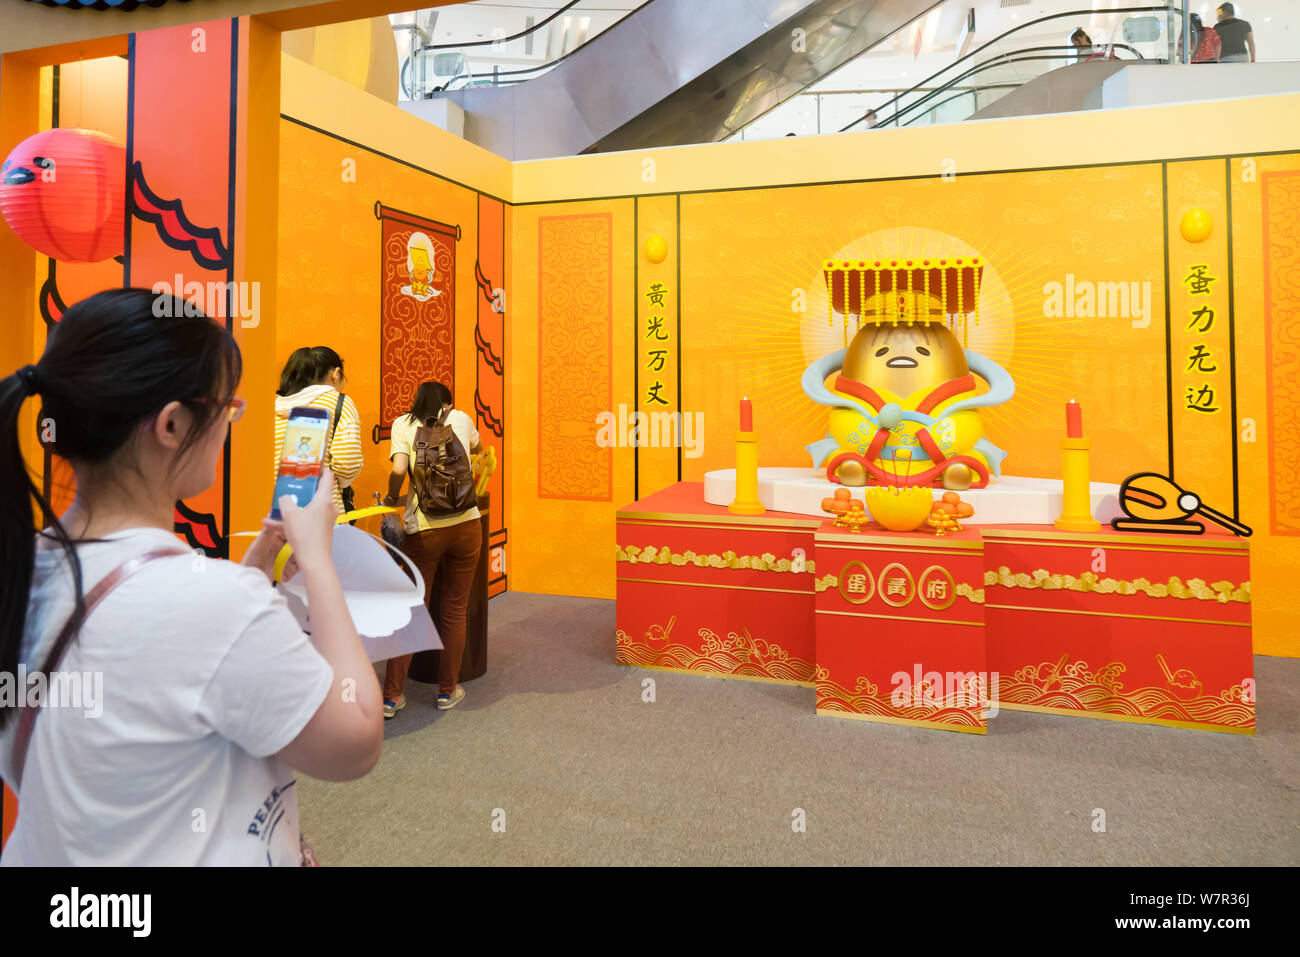 Cartoon enthusiasts takes photos of Gudetama, or lazy egg, created by Hello Kitty's developer Sanrio, in Shanghai, China, 19 June 2017.   The Japanese Stock Photo